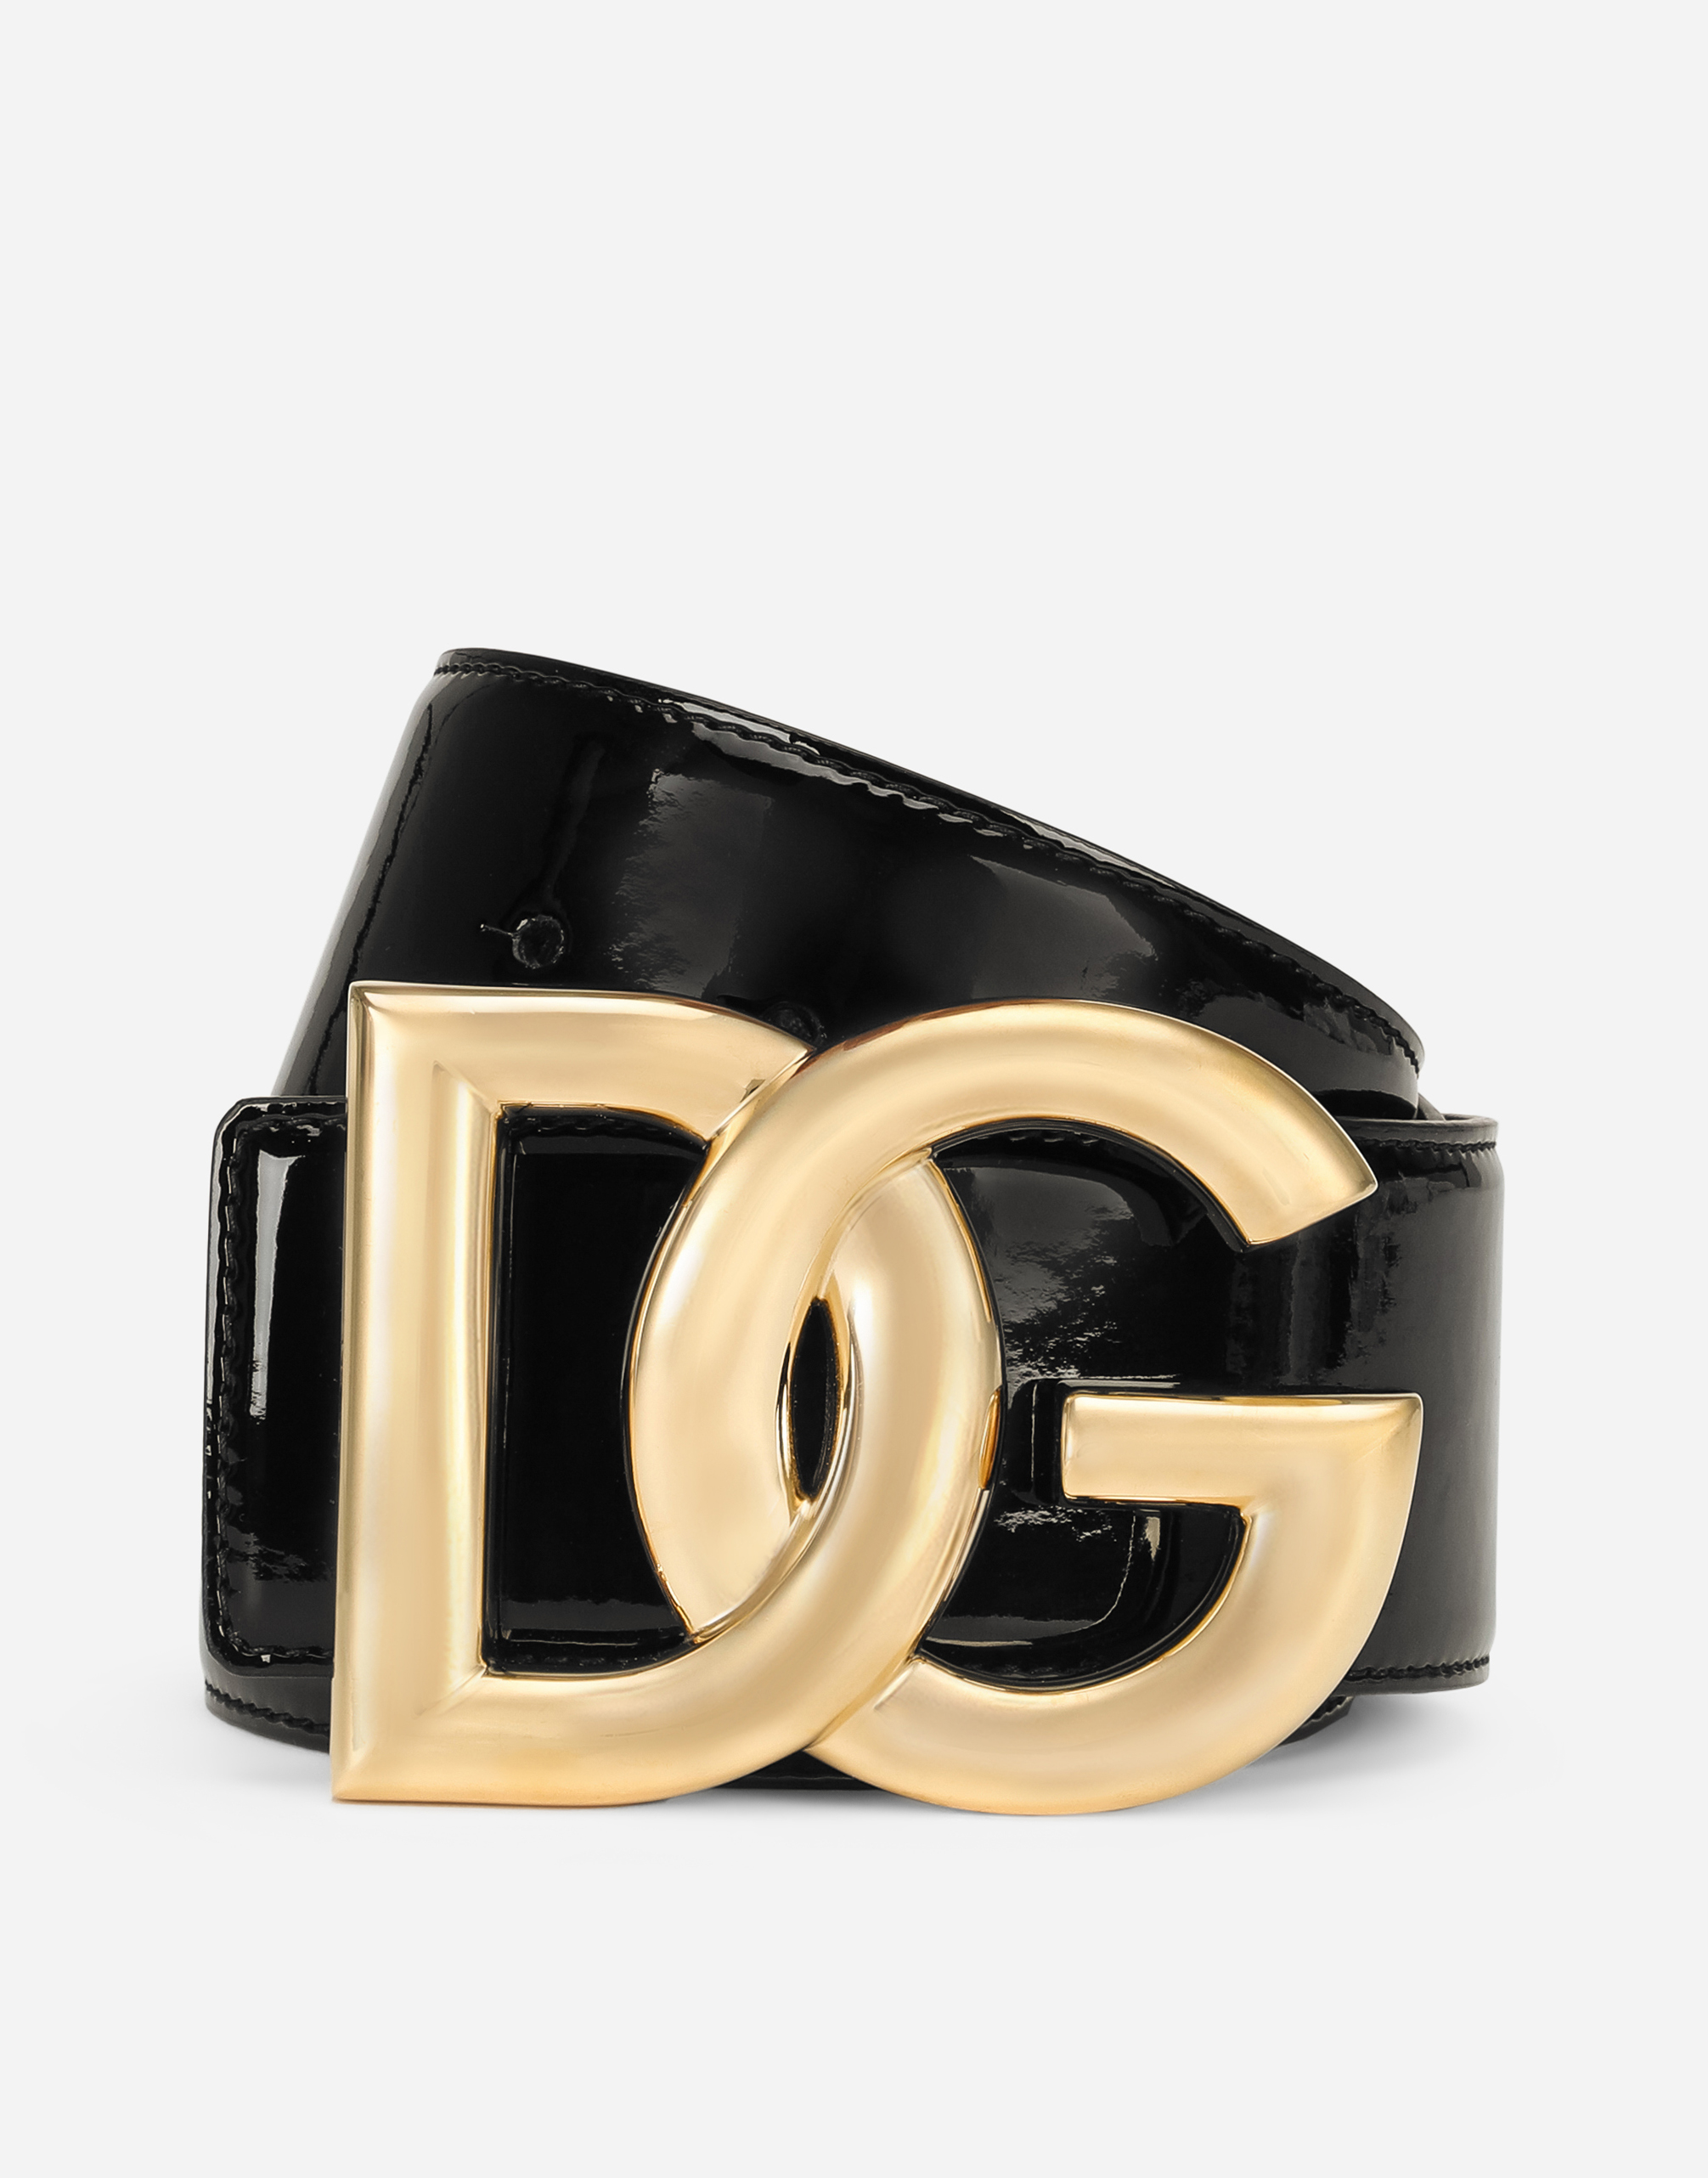 Patent leather belt with DG logo in Black